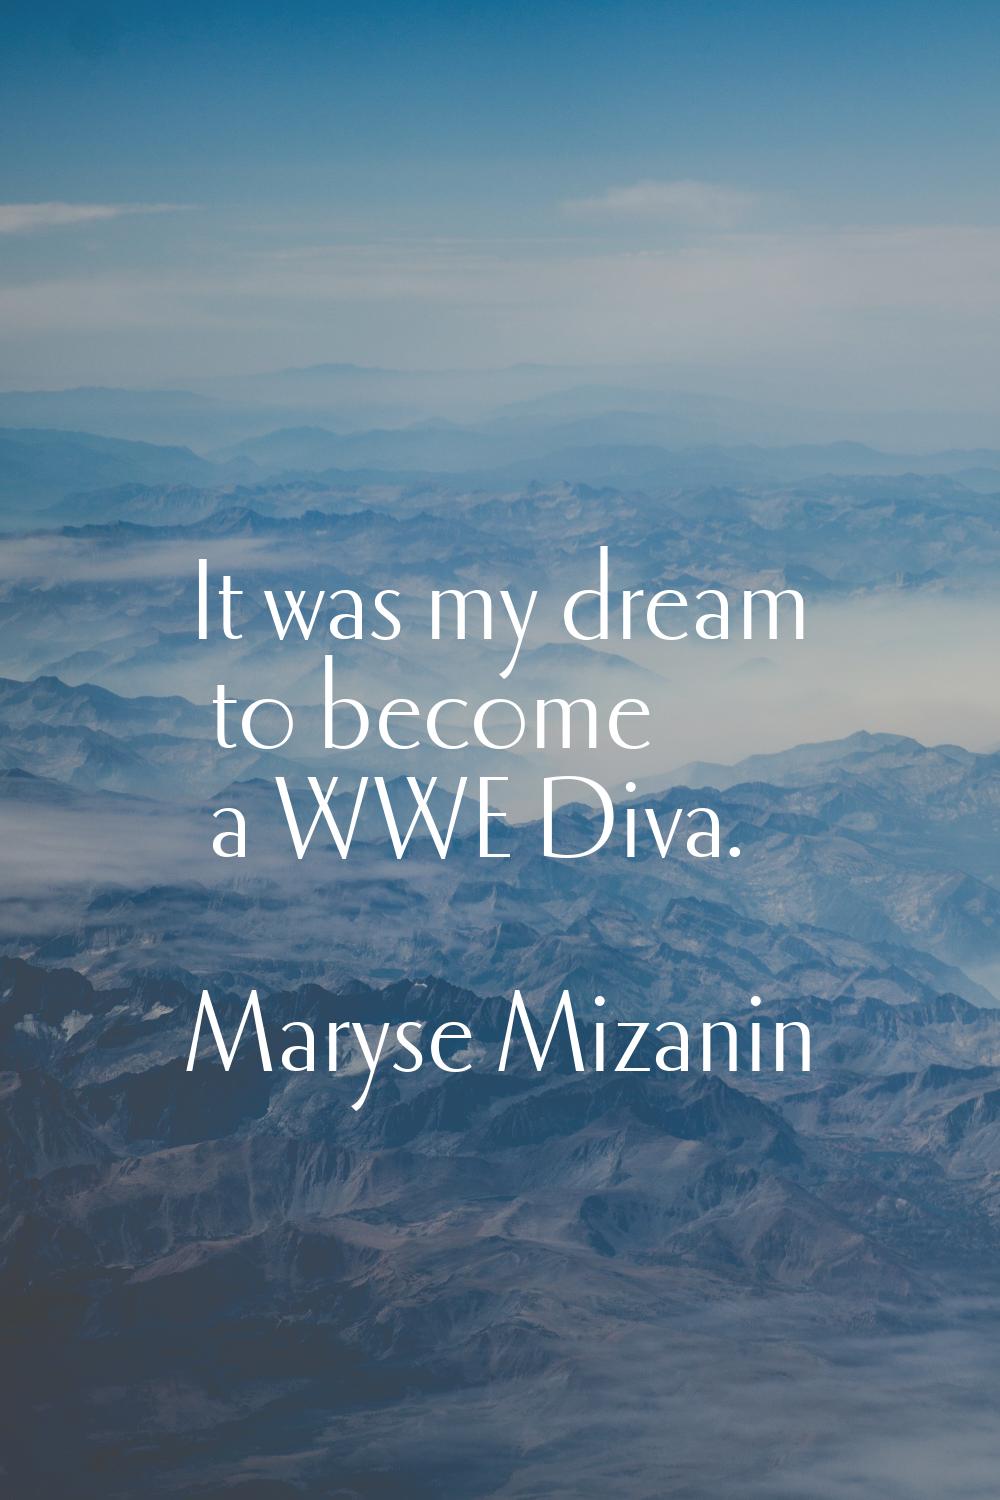 It was my dream to become a WWE Diva.